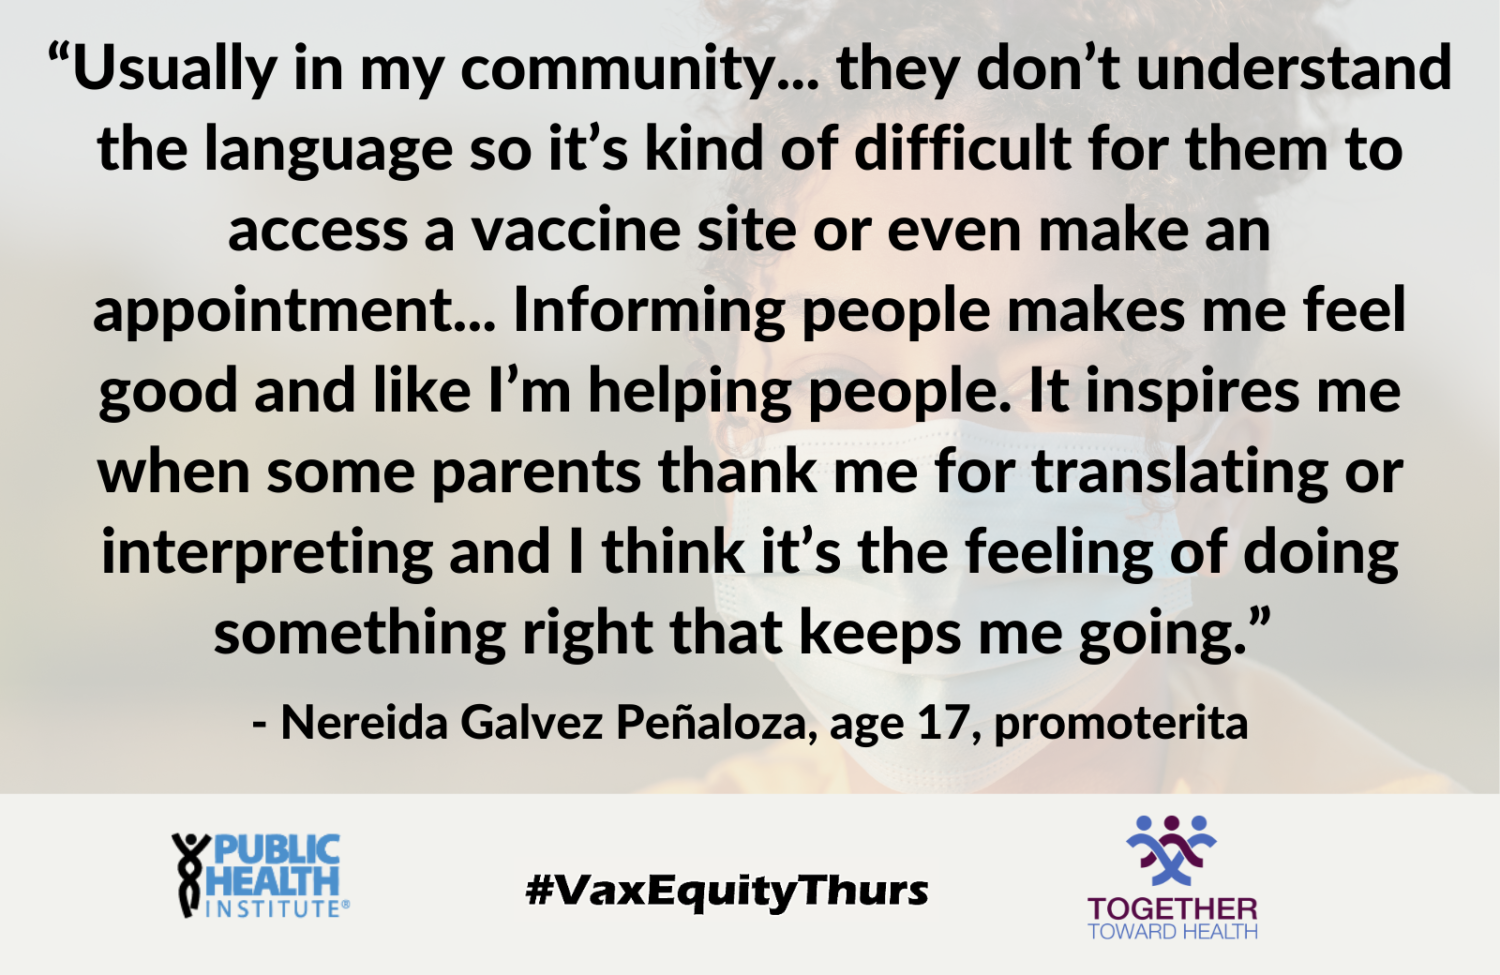 Usually in my community... they don’t understand the language so it’s kind of difficult for them to access a vaccine site or even make an appointment... Informing people makes me feel good and like I’m helping people. It inspires me when some parents thank me for translating or interpreting and I think it’s the feeling of doing something right that keeps me going.” - Nereida Galvez Peñaloza, age 17, promoterita